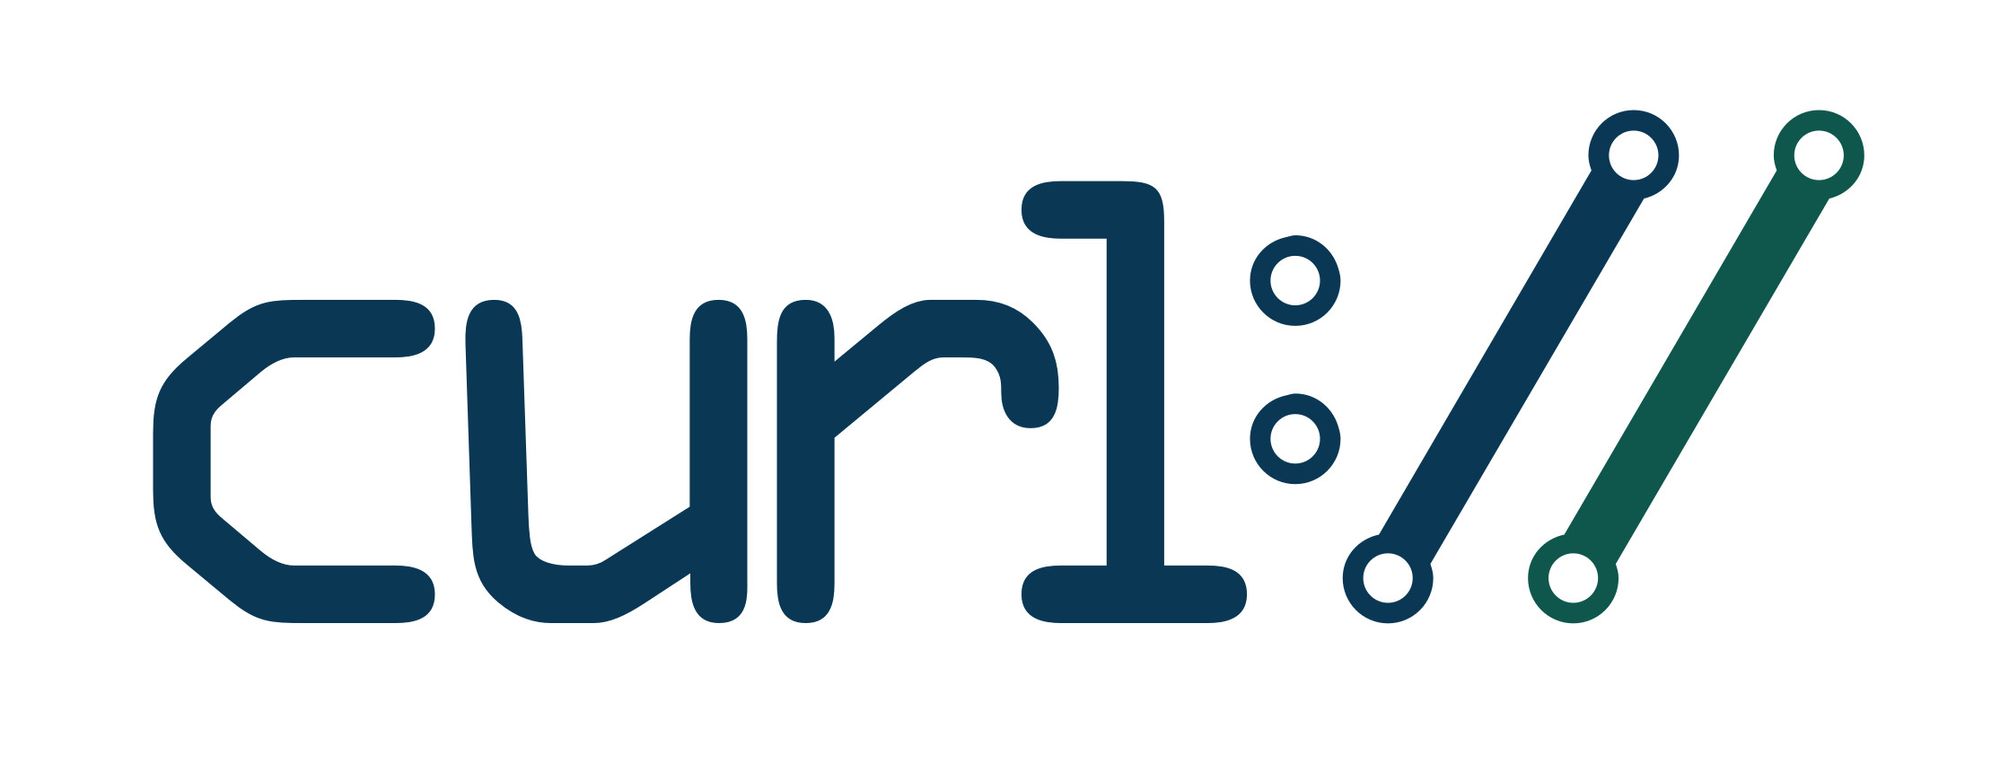 Learning from the journey of popular open-source project cURL